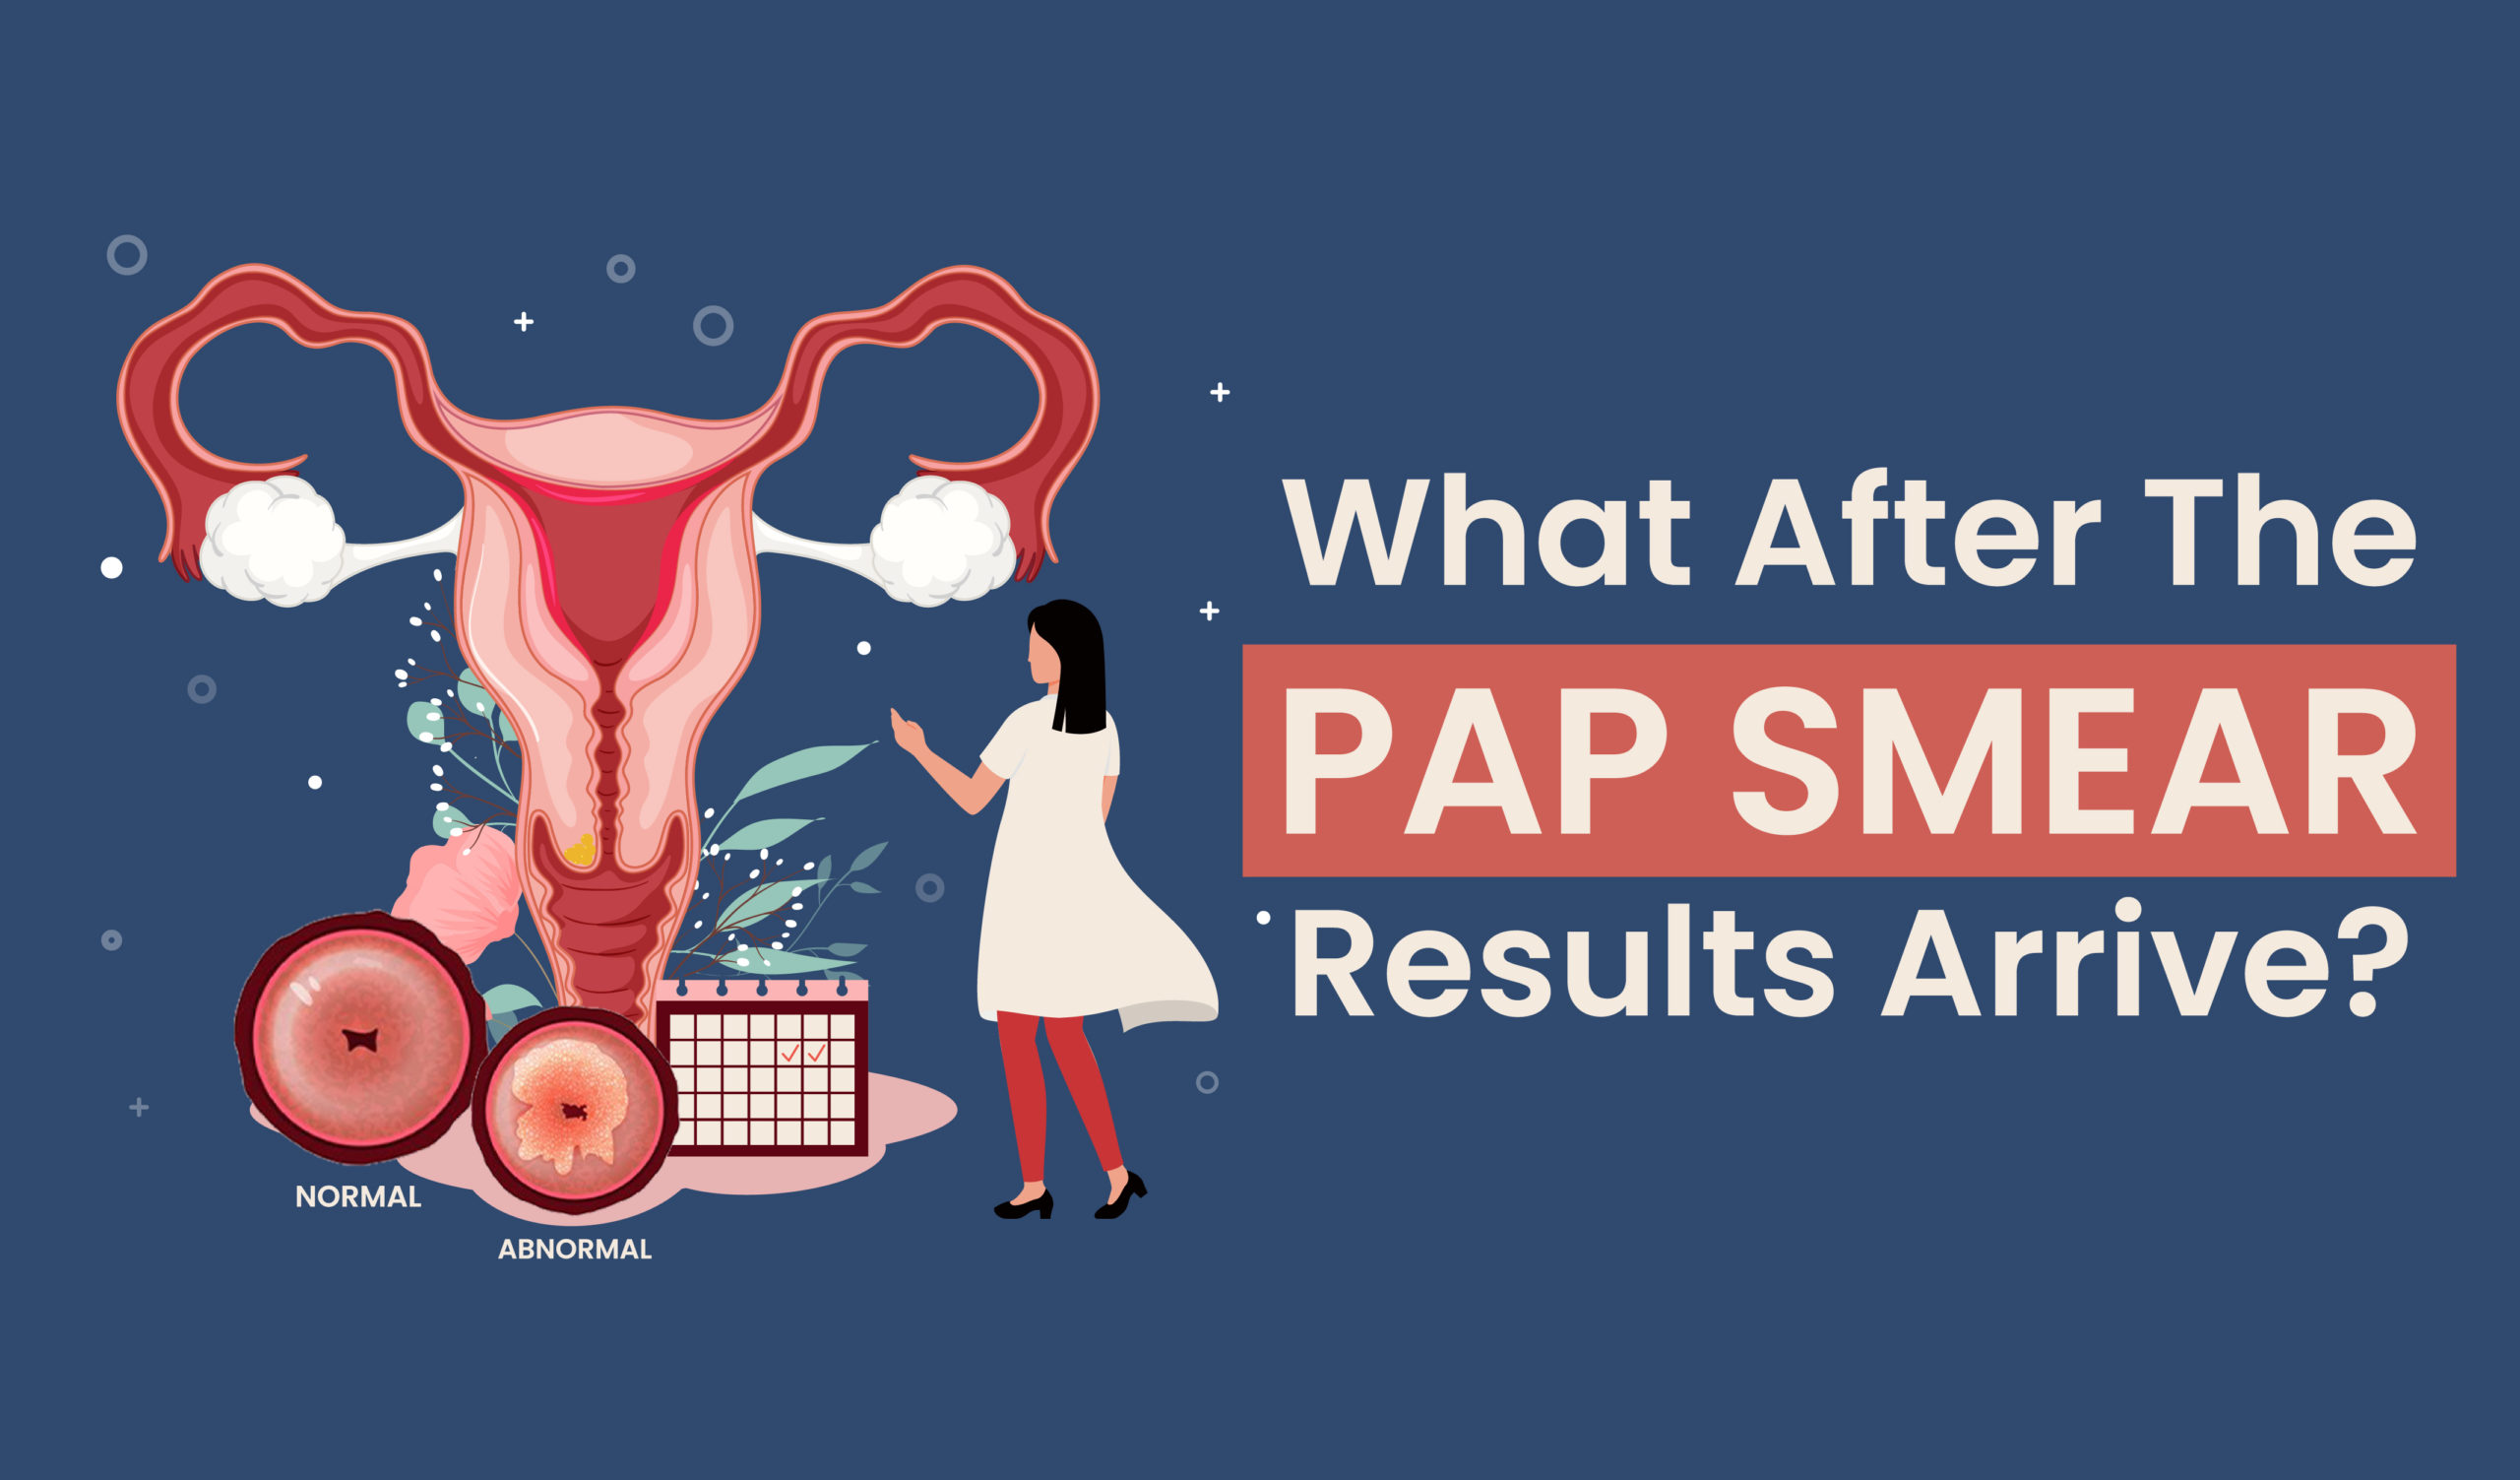 What After the Pap smear results arrive